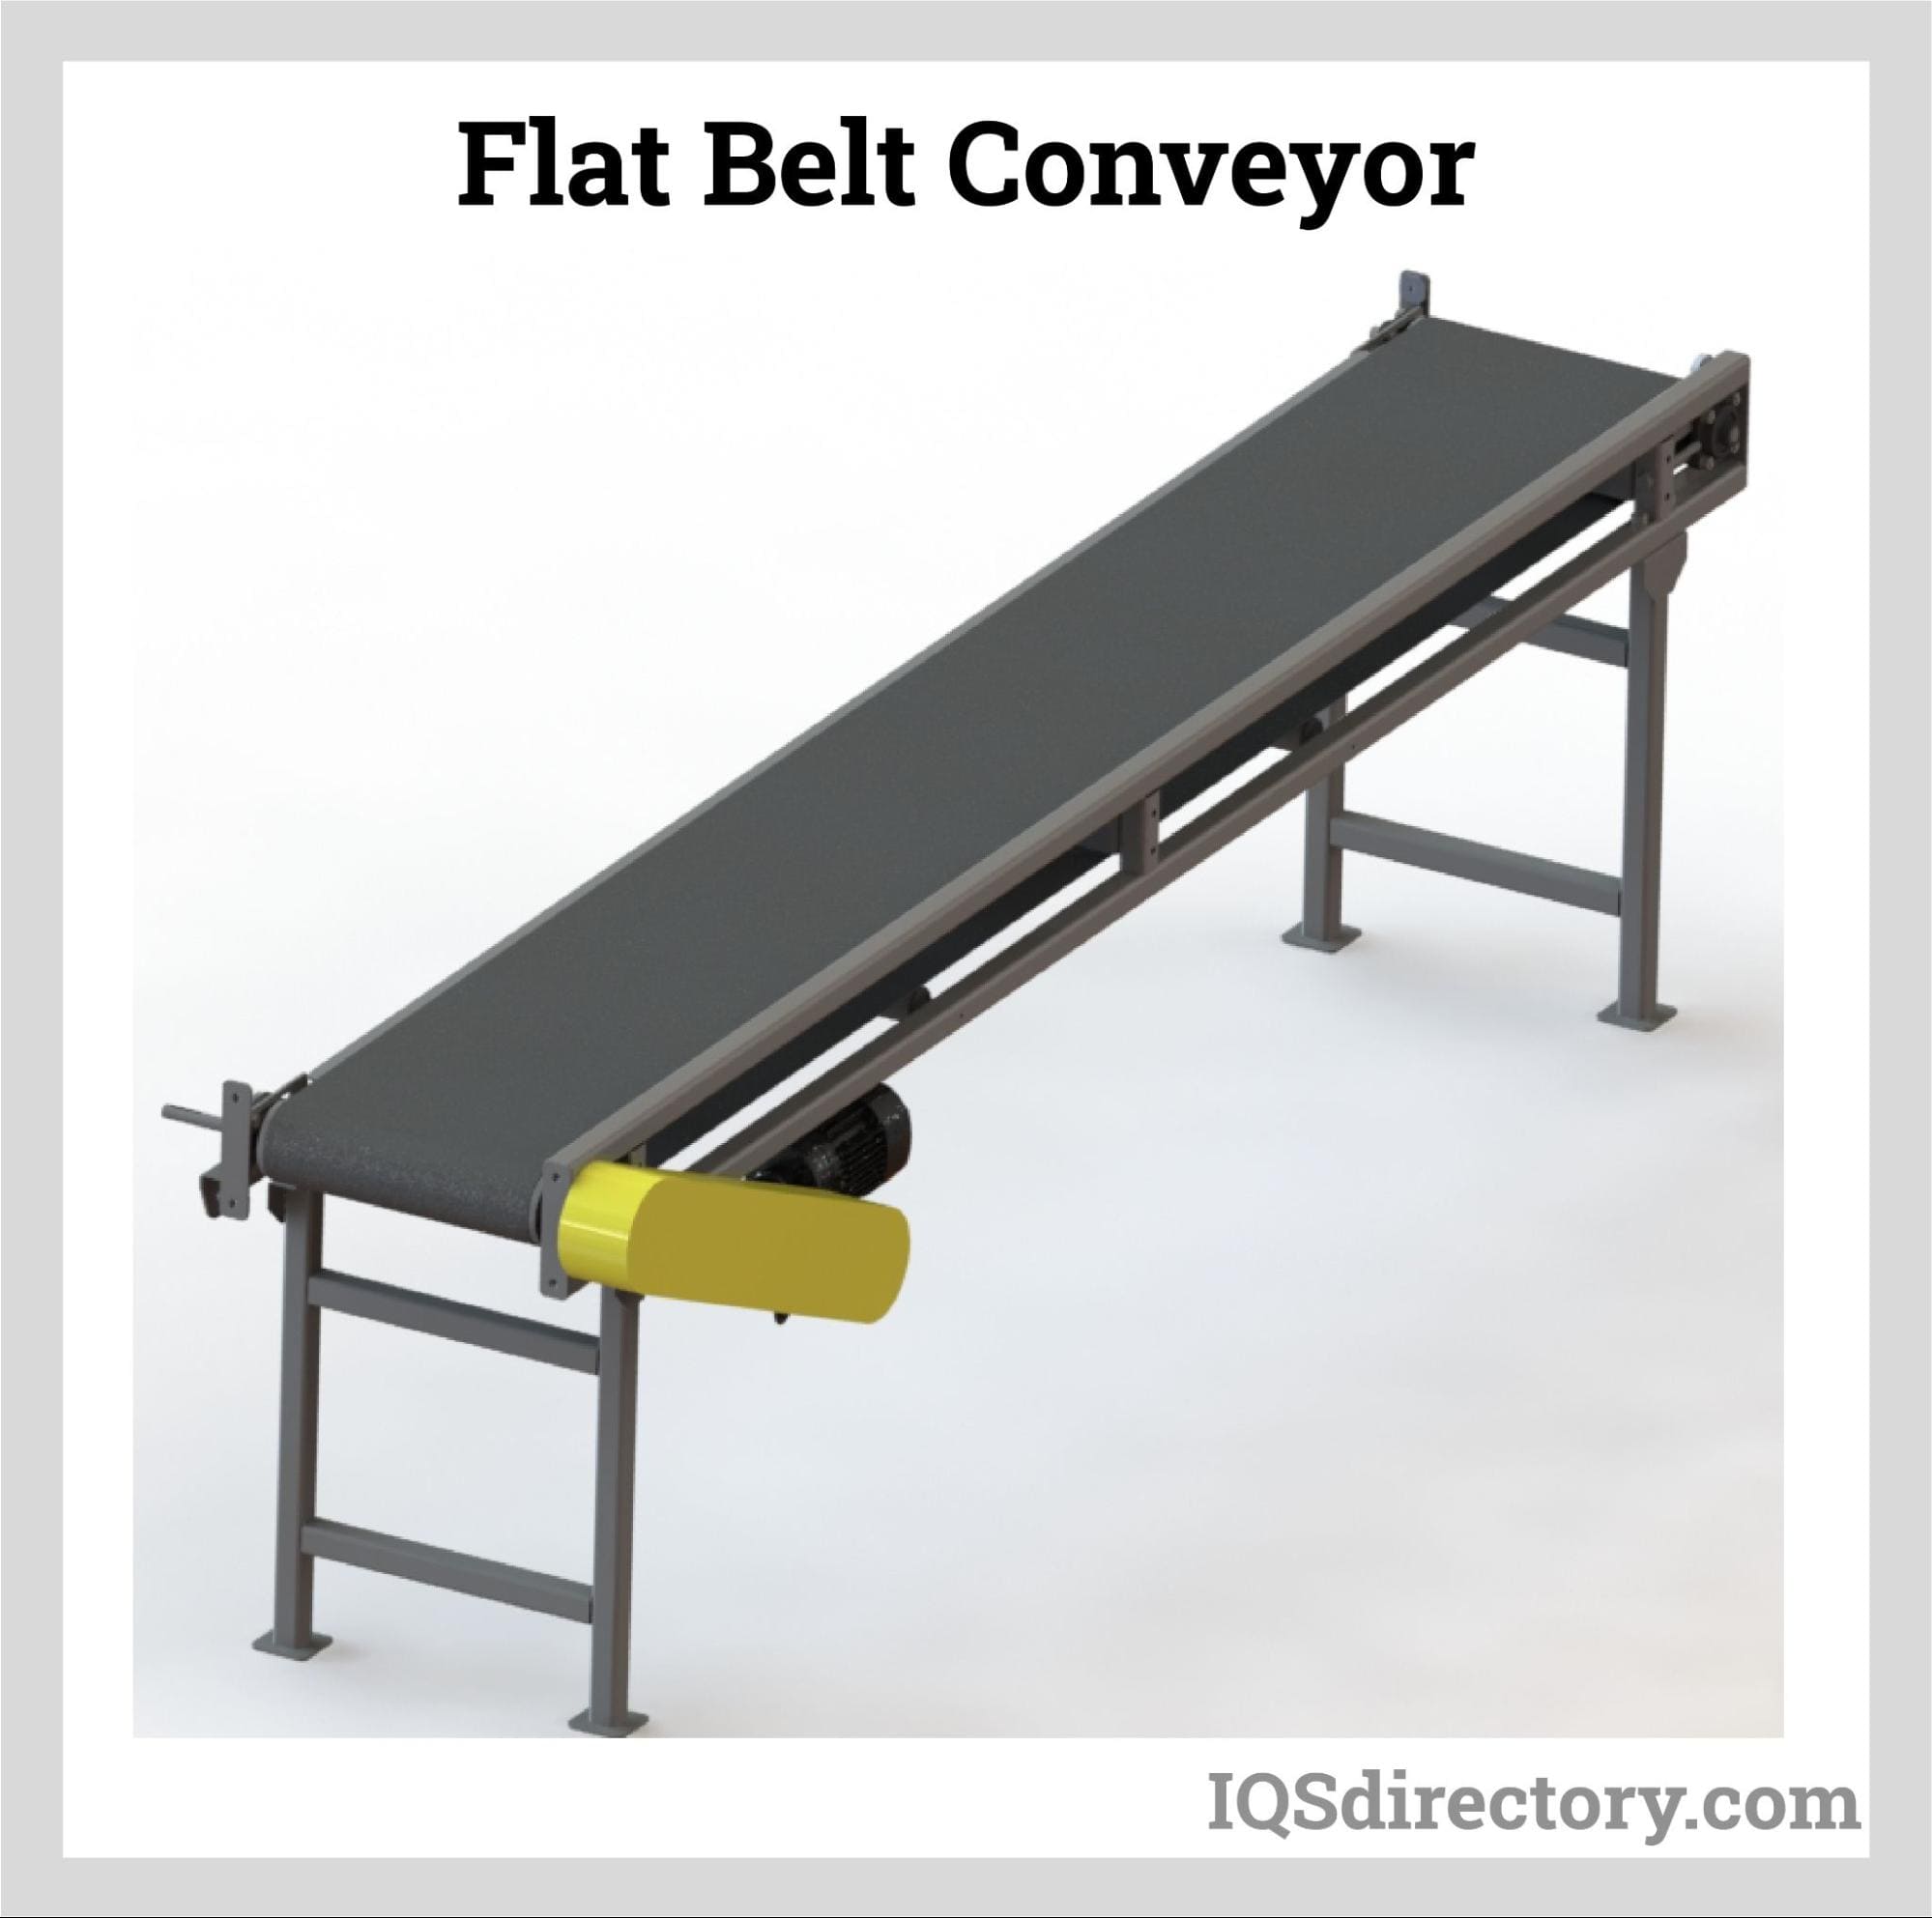 Belt Conveyors: Components, Types, Design, and Applications